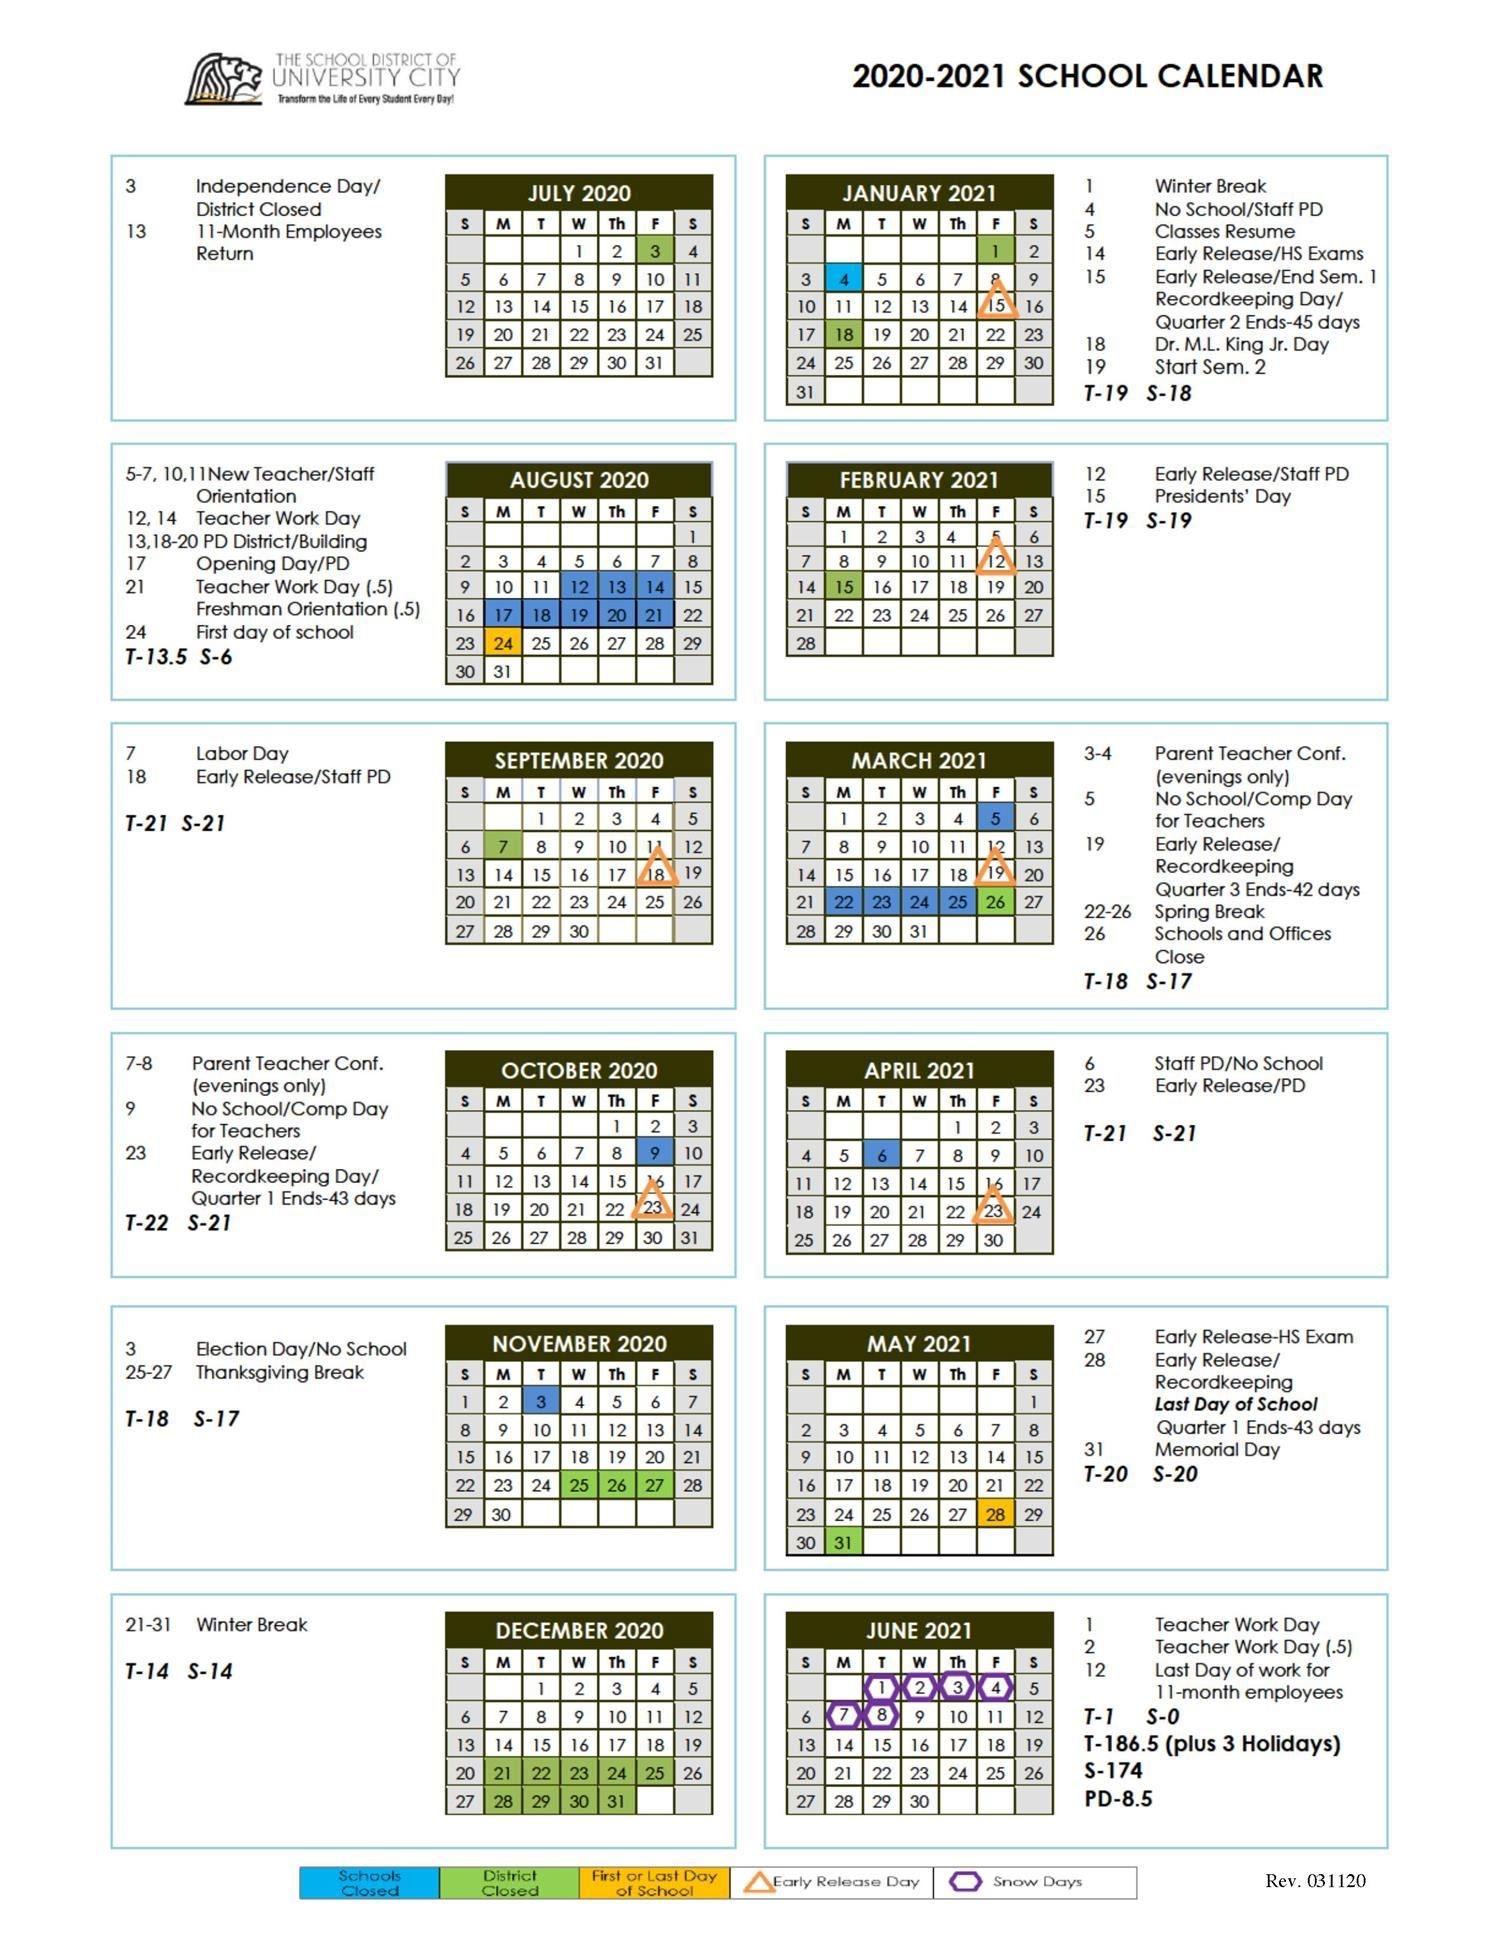 Revised 2020-21 School Year Calendar Now Available